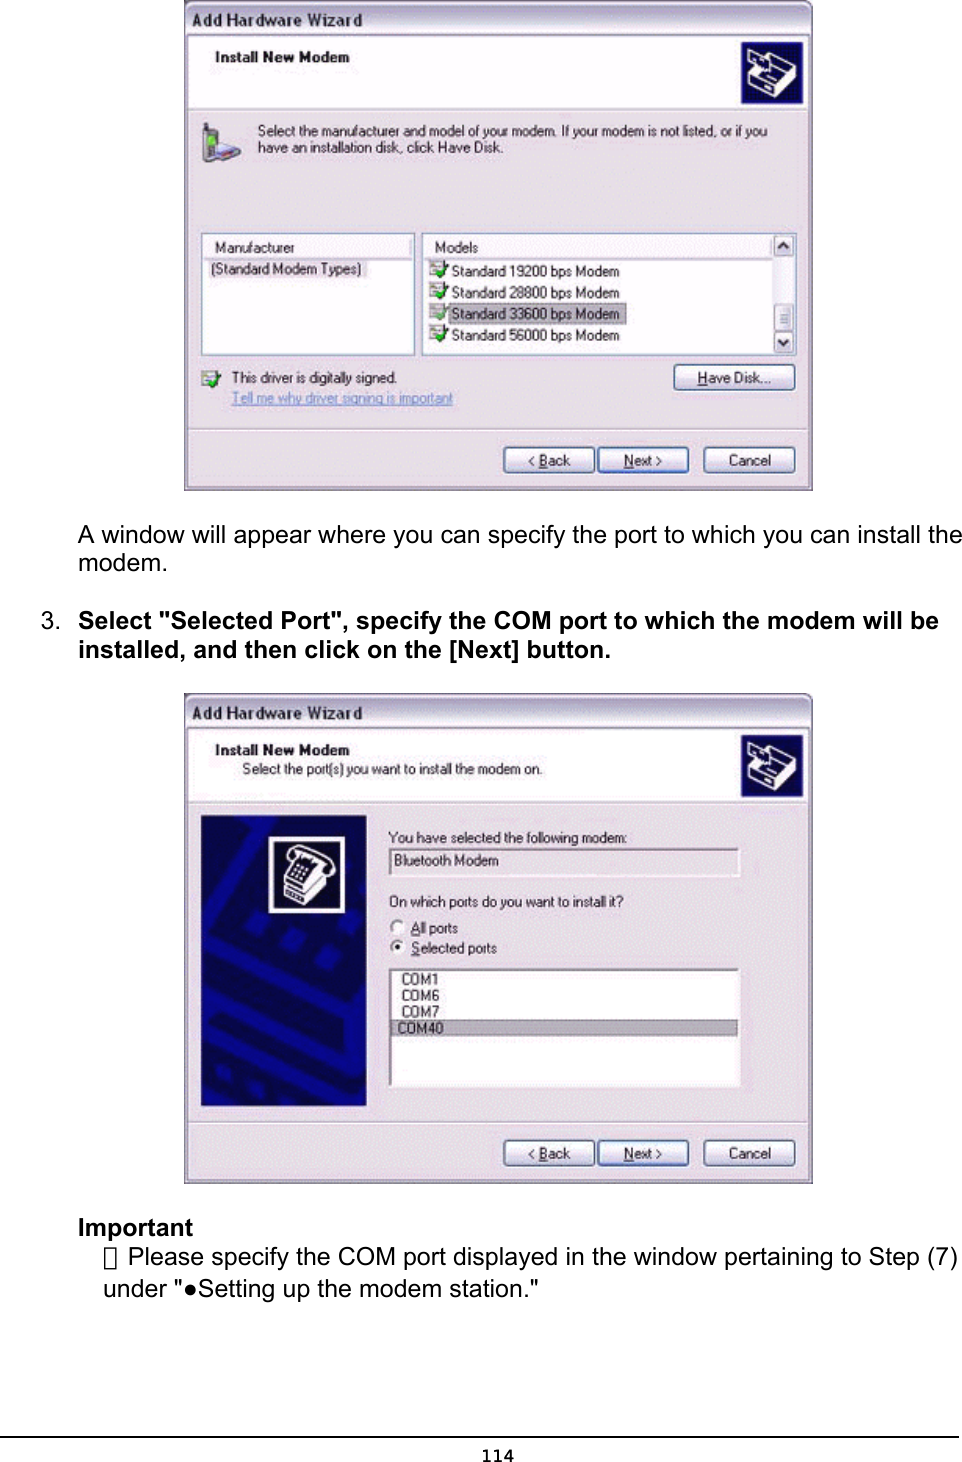   A window will appear where you can specify the port to which you can install the modem. 3.  Select &quot;Selected Port&quot;, specify the COM port to which the modem will be installed, and then click on the [Next] button.  Important  ．Please specify the COM port displayed in the window pertaining to Step (7)  under &quot;●Setting up the modem station.&quot;    114